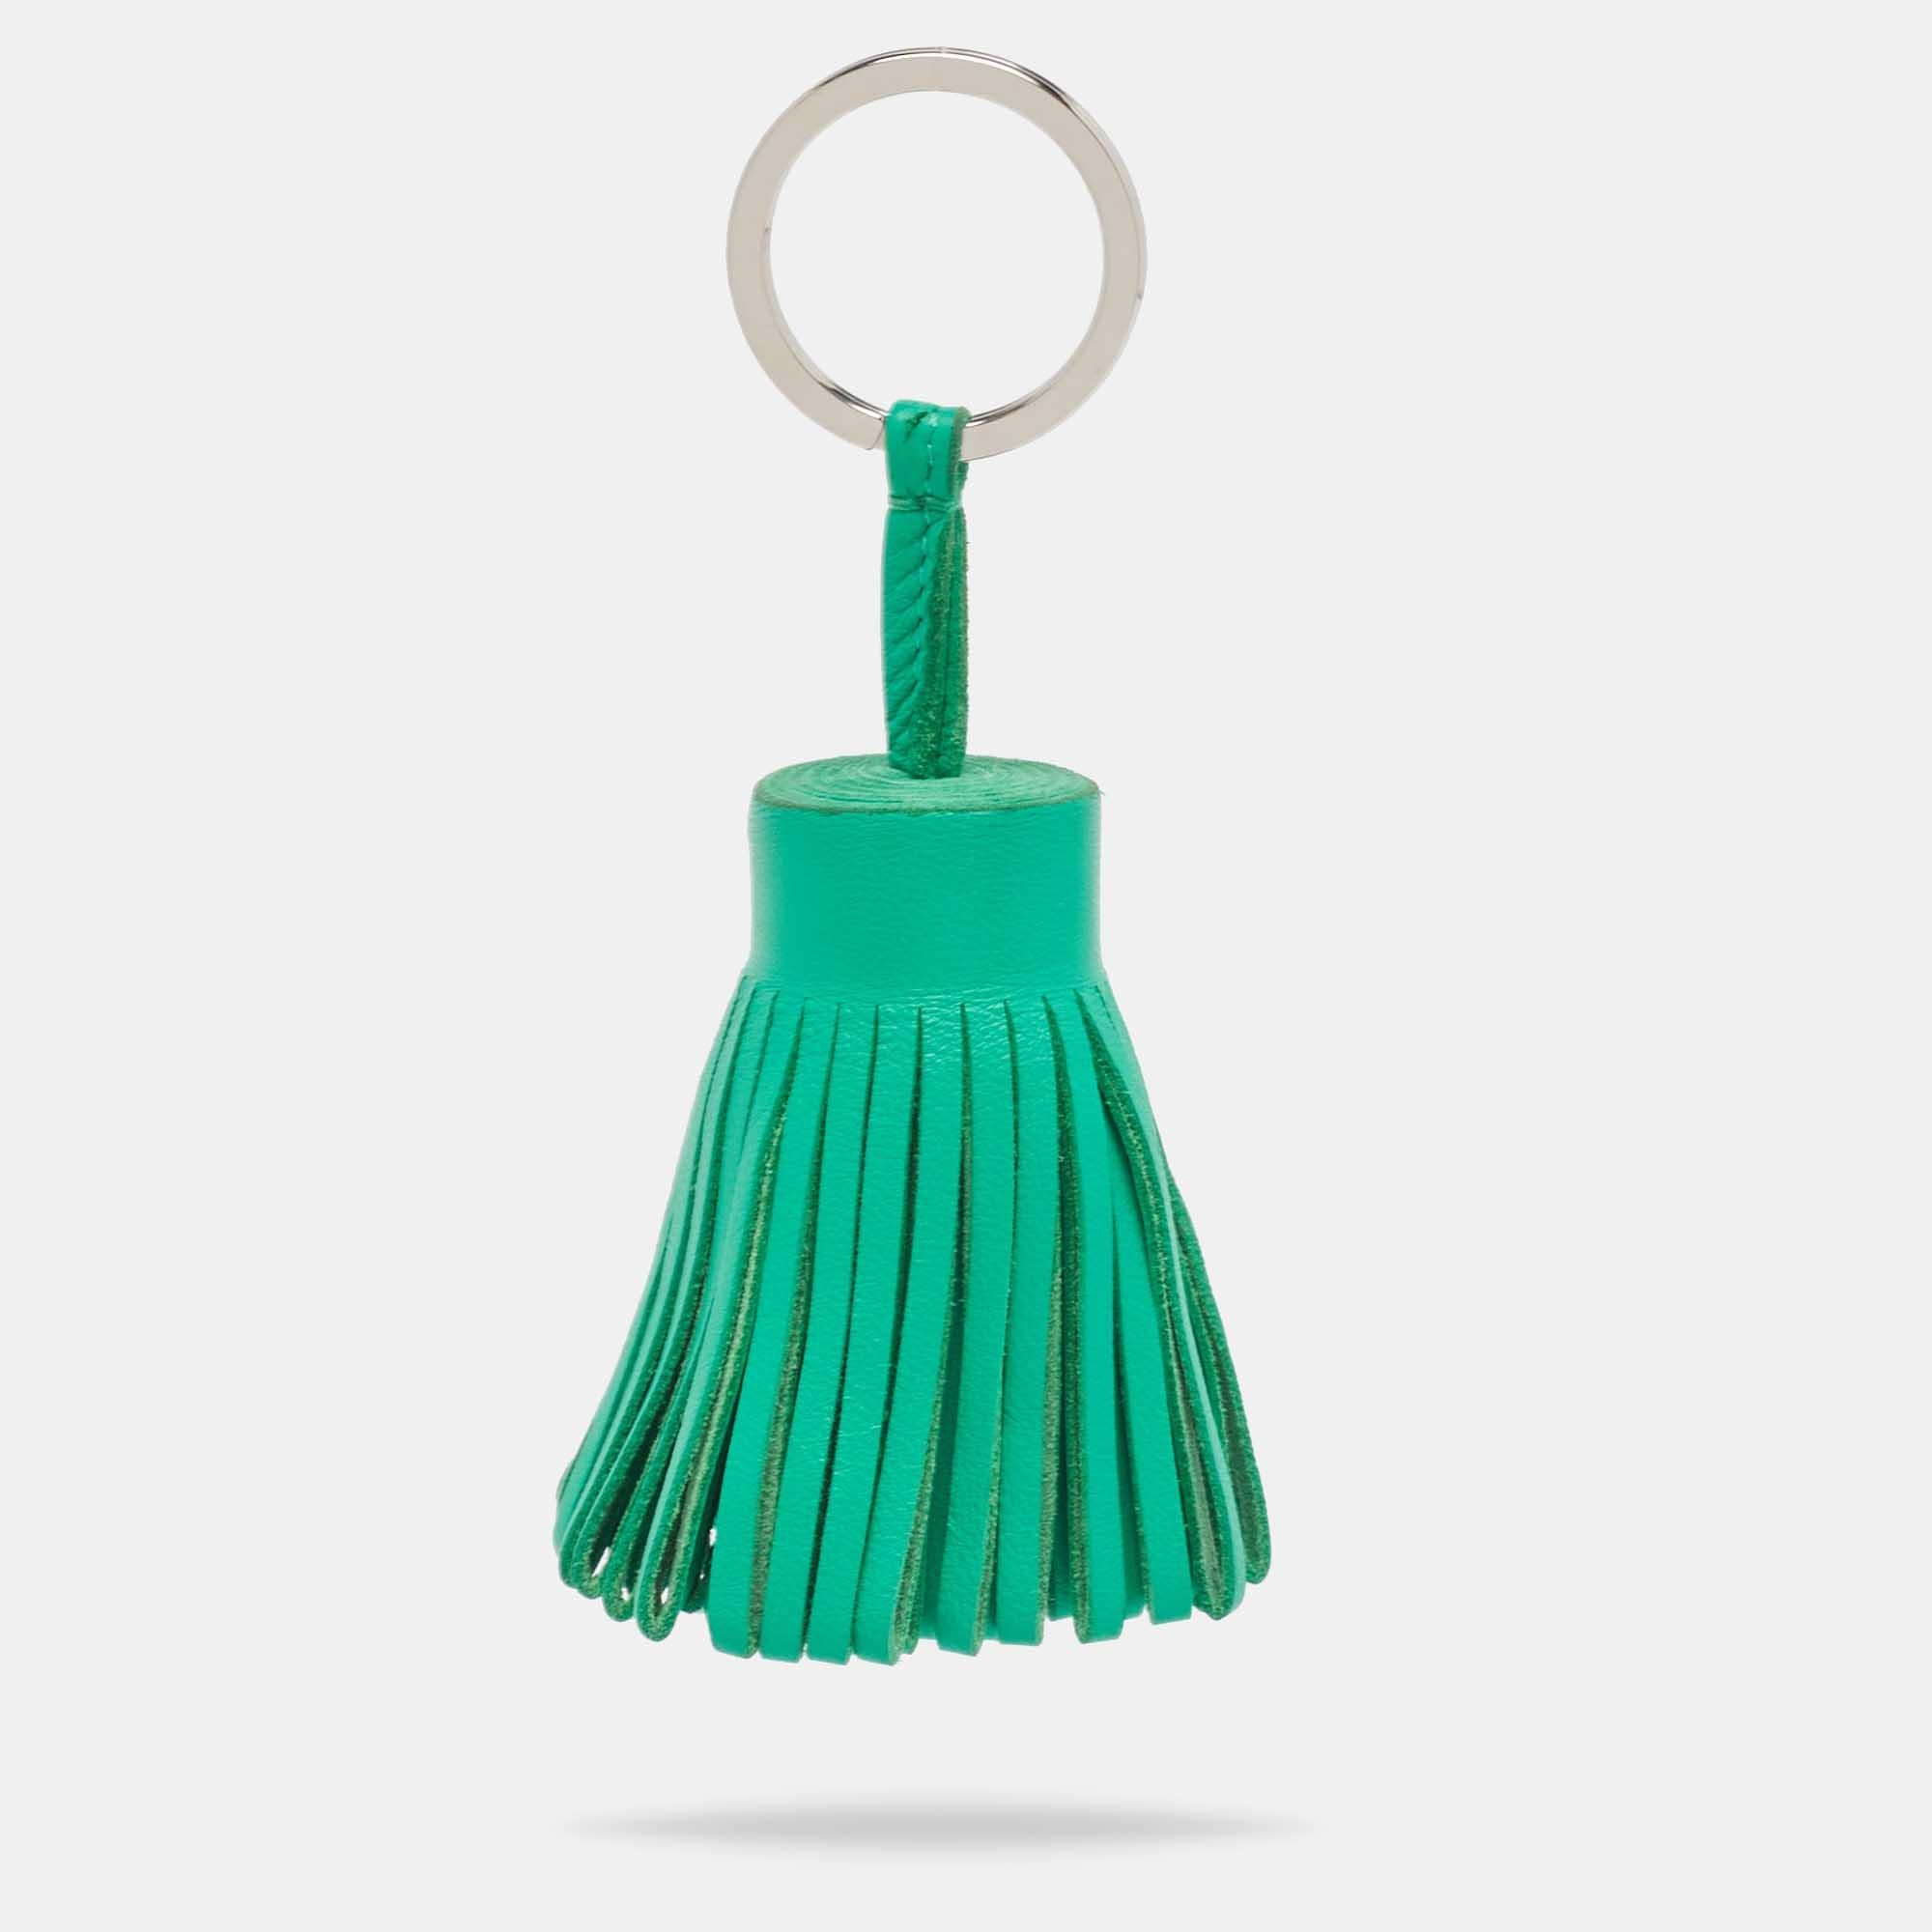 The Hermès Carmen key ring is a stylish accessory that adds a touch of luxury to your everyday essentials. Crafted from green leather, it features a tassel design and a metal ring to hold your keys.

